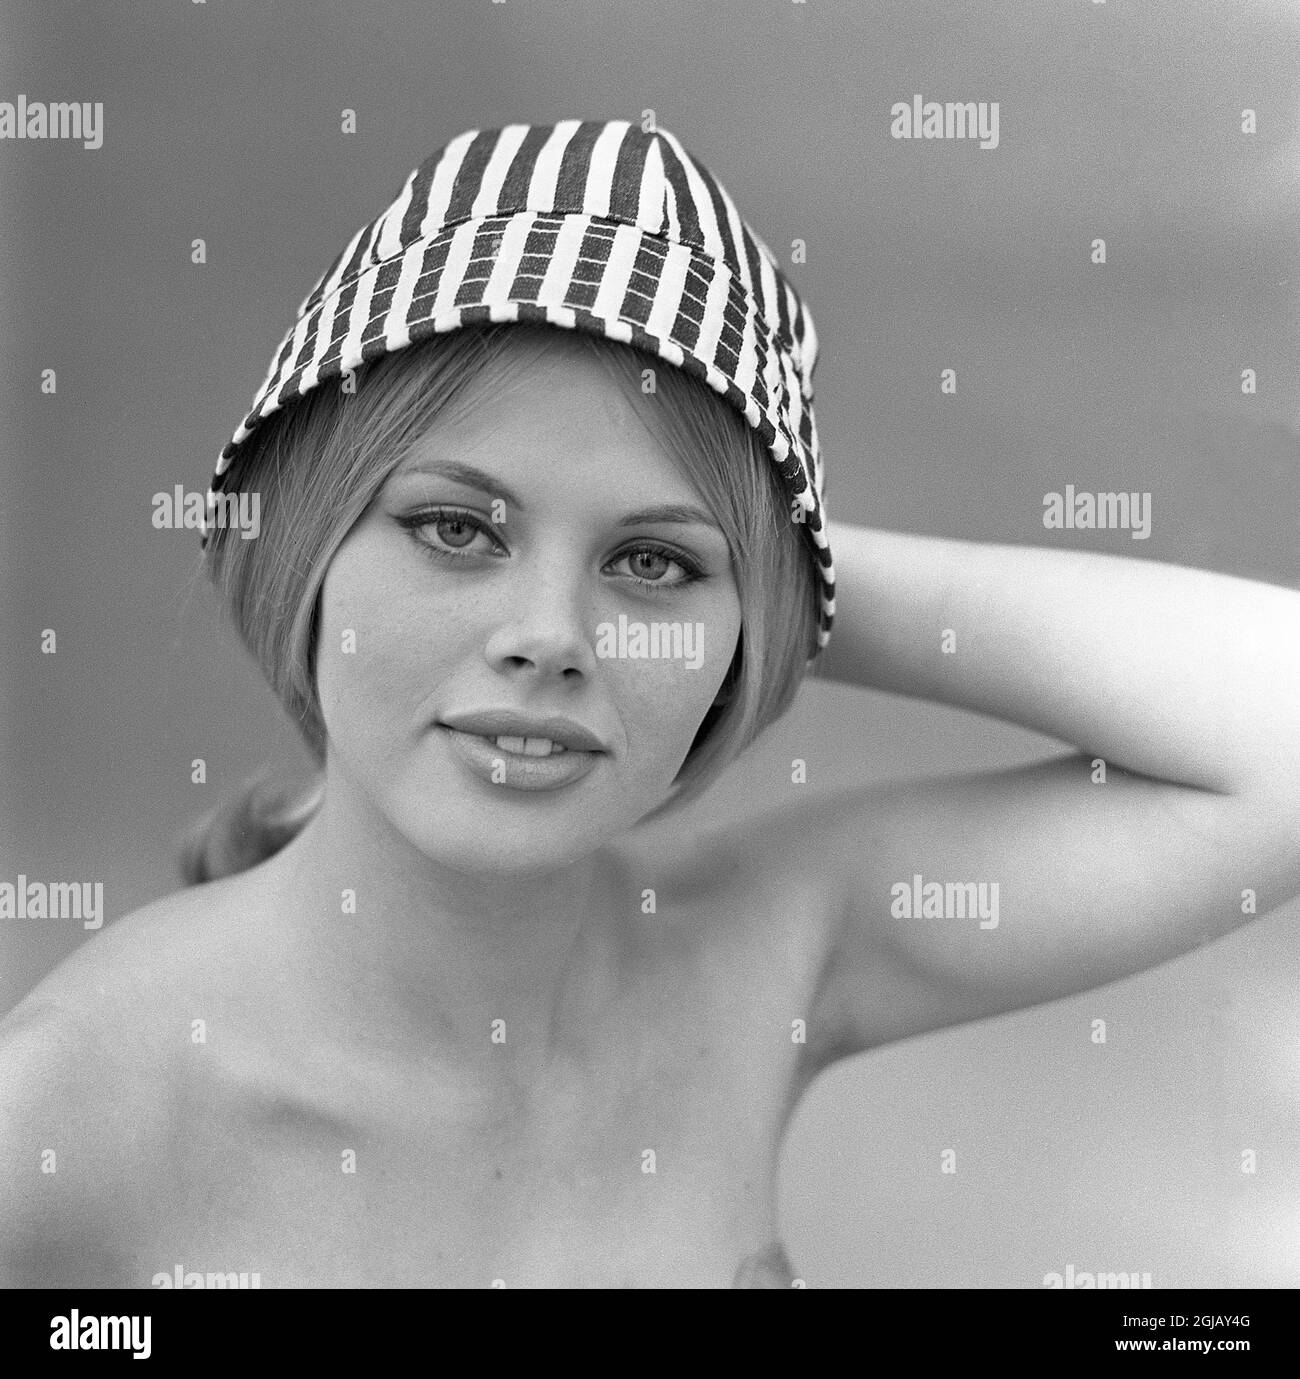 FILE 1958 A 16 year old Britt Ekland is posing for the photographer in Stockholm, Sweden, 1958. Britt Ekland, who became an actress, a reality TV star and a 'Bond girlâ€, is turning 75 in October 6, 2017. brittekland2017 Foto: Kary Lasch / TT / Kod: 4520  Stock Photo